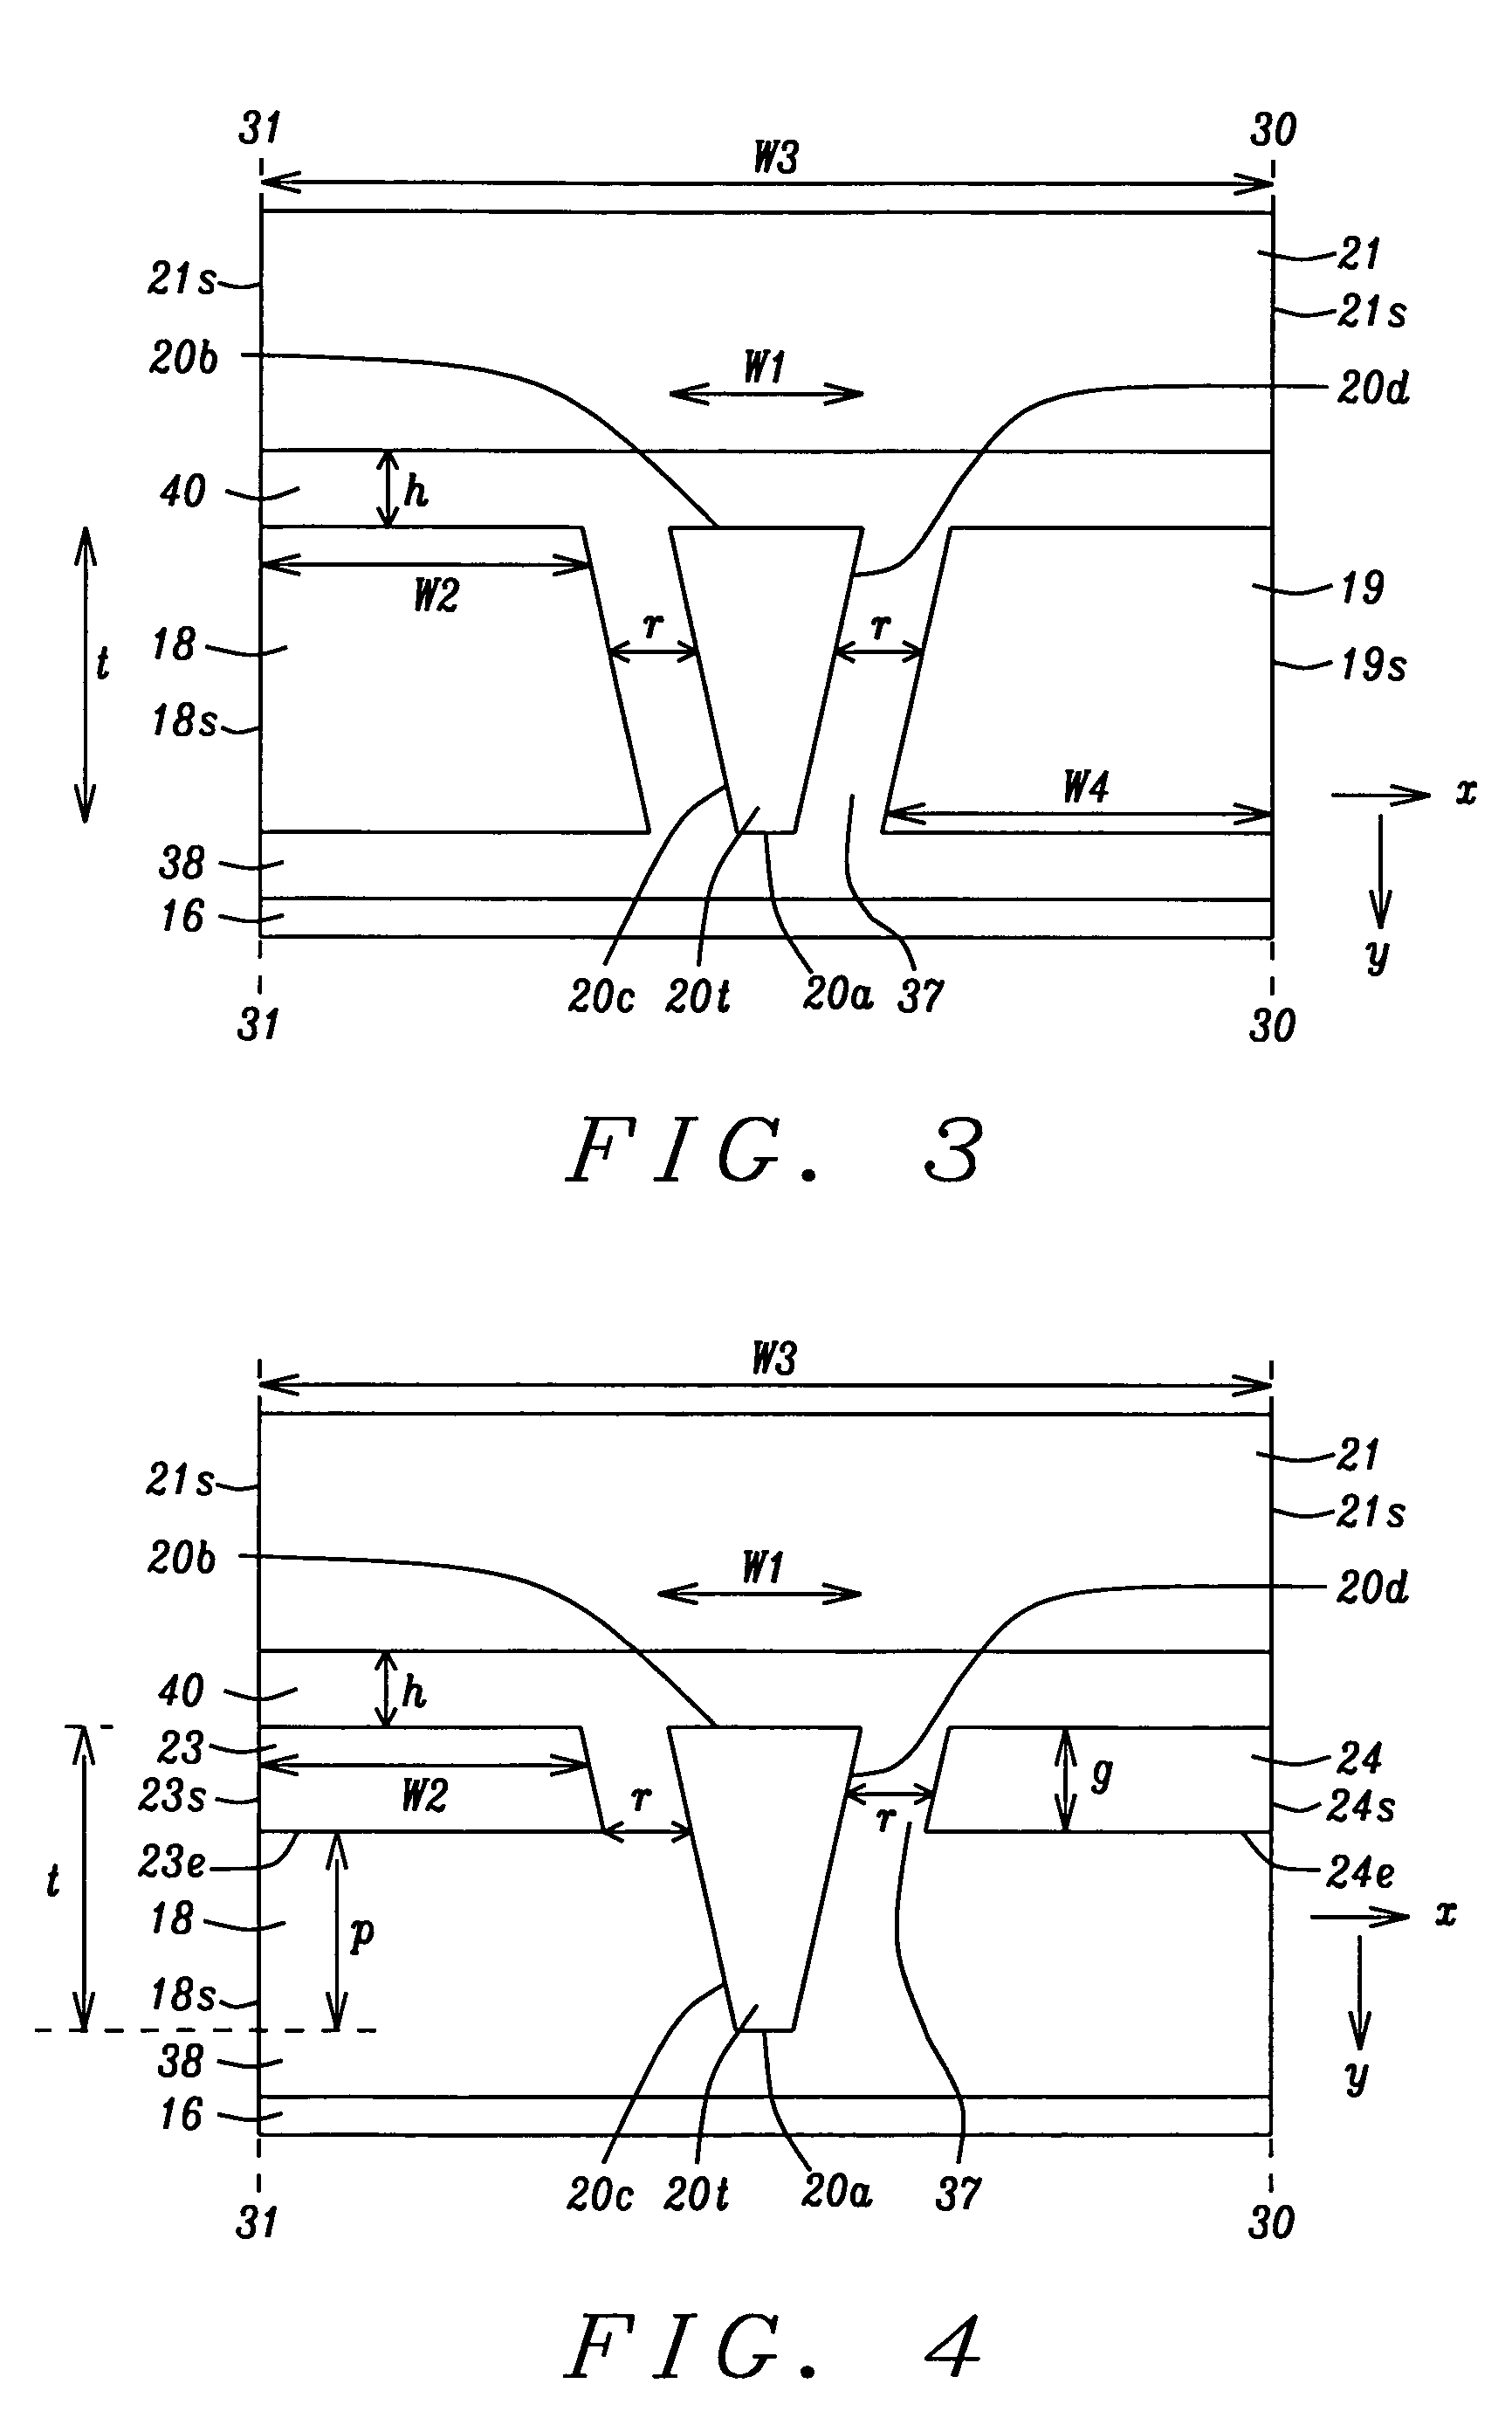 Optimized write pole flare angle for side shield or semi side shield PMR writer application